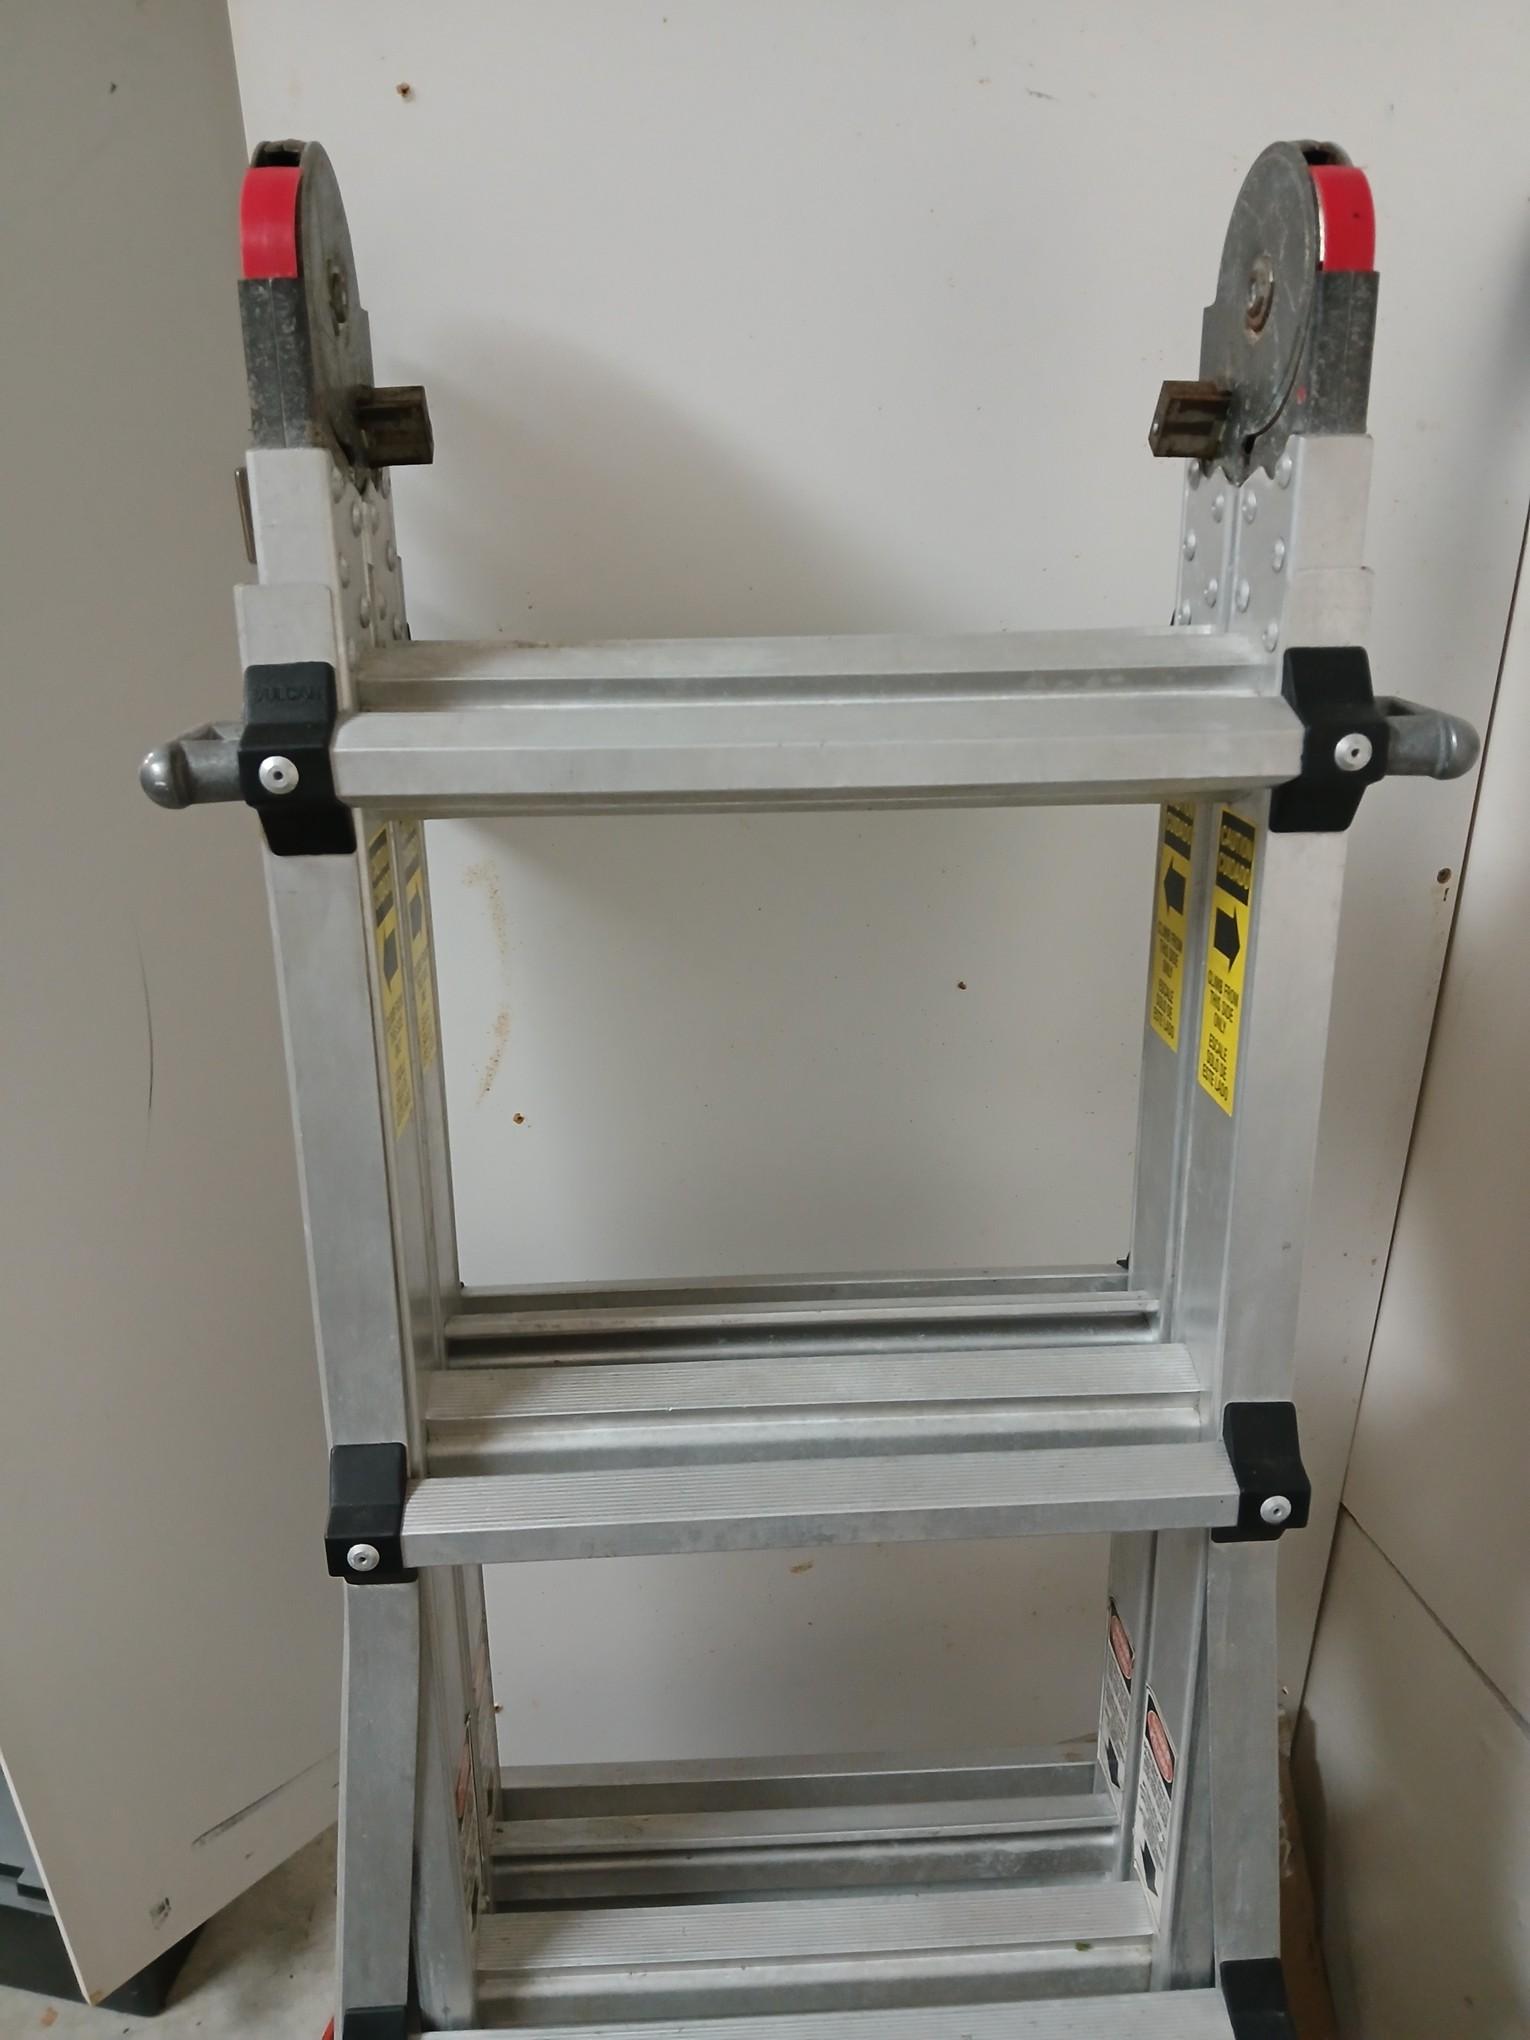 Large Foldable Ladder / Good Condition